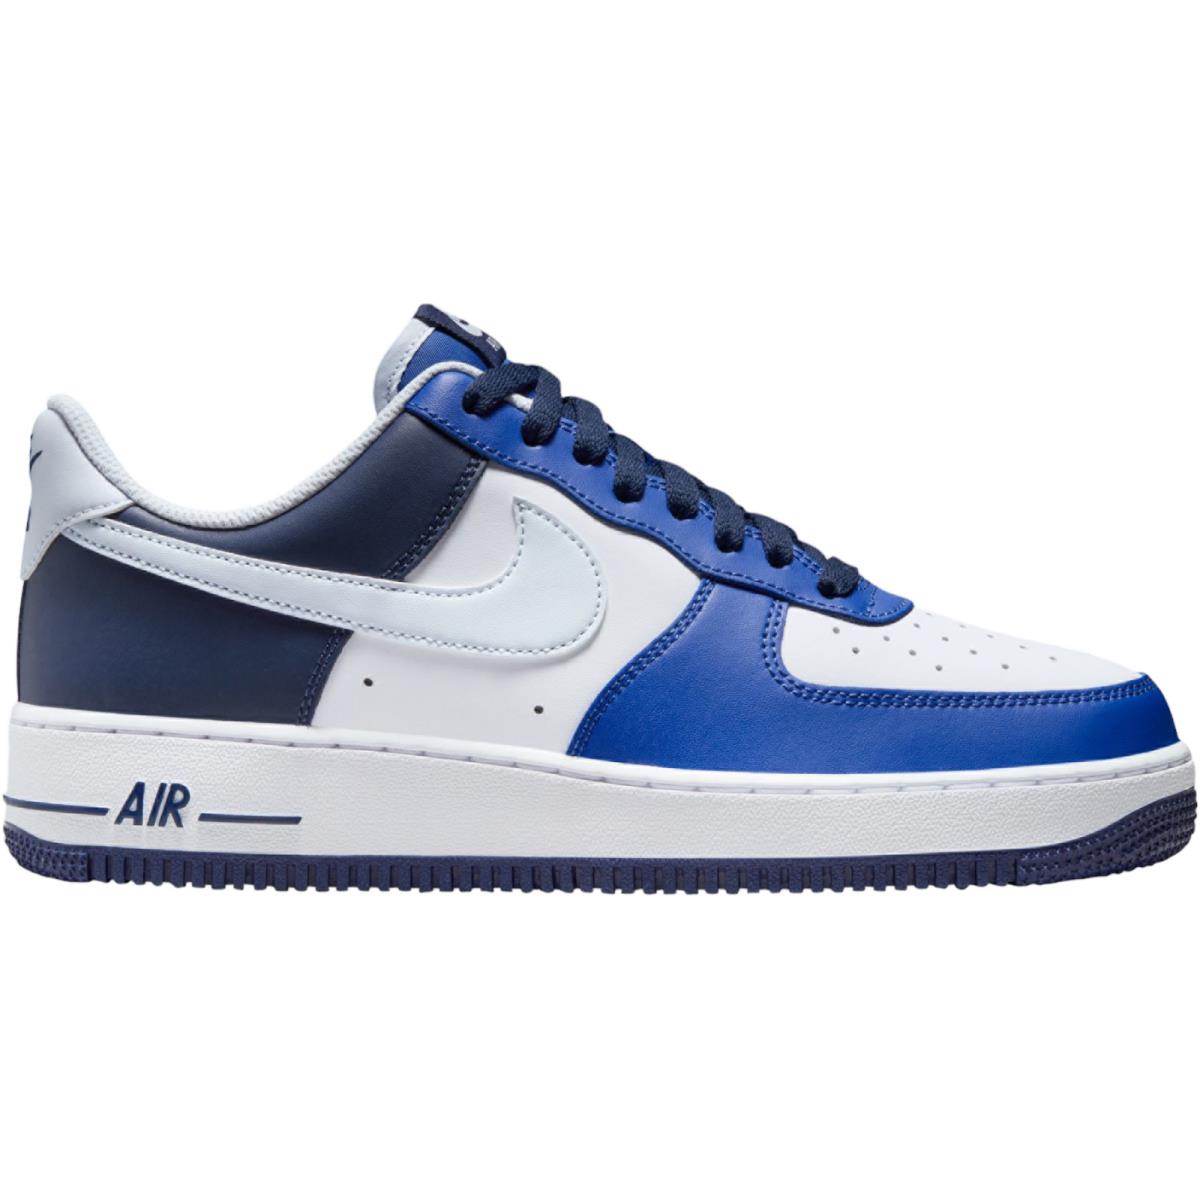 Nike Air Force 1 `07 Men`s Casual Shoes All Colors US Sizes 7-14 White/Game Royal/Midnight Navy/Football Grey